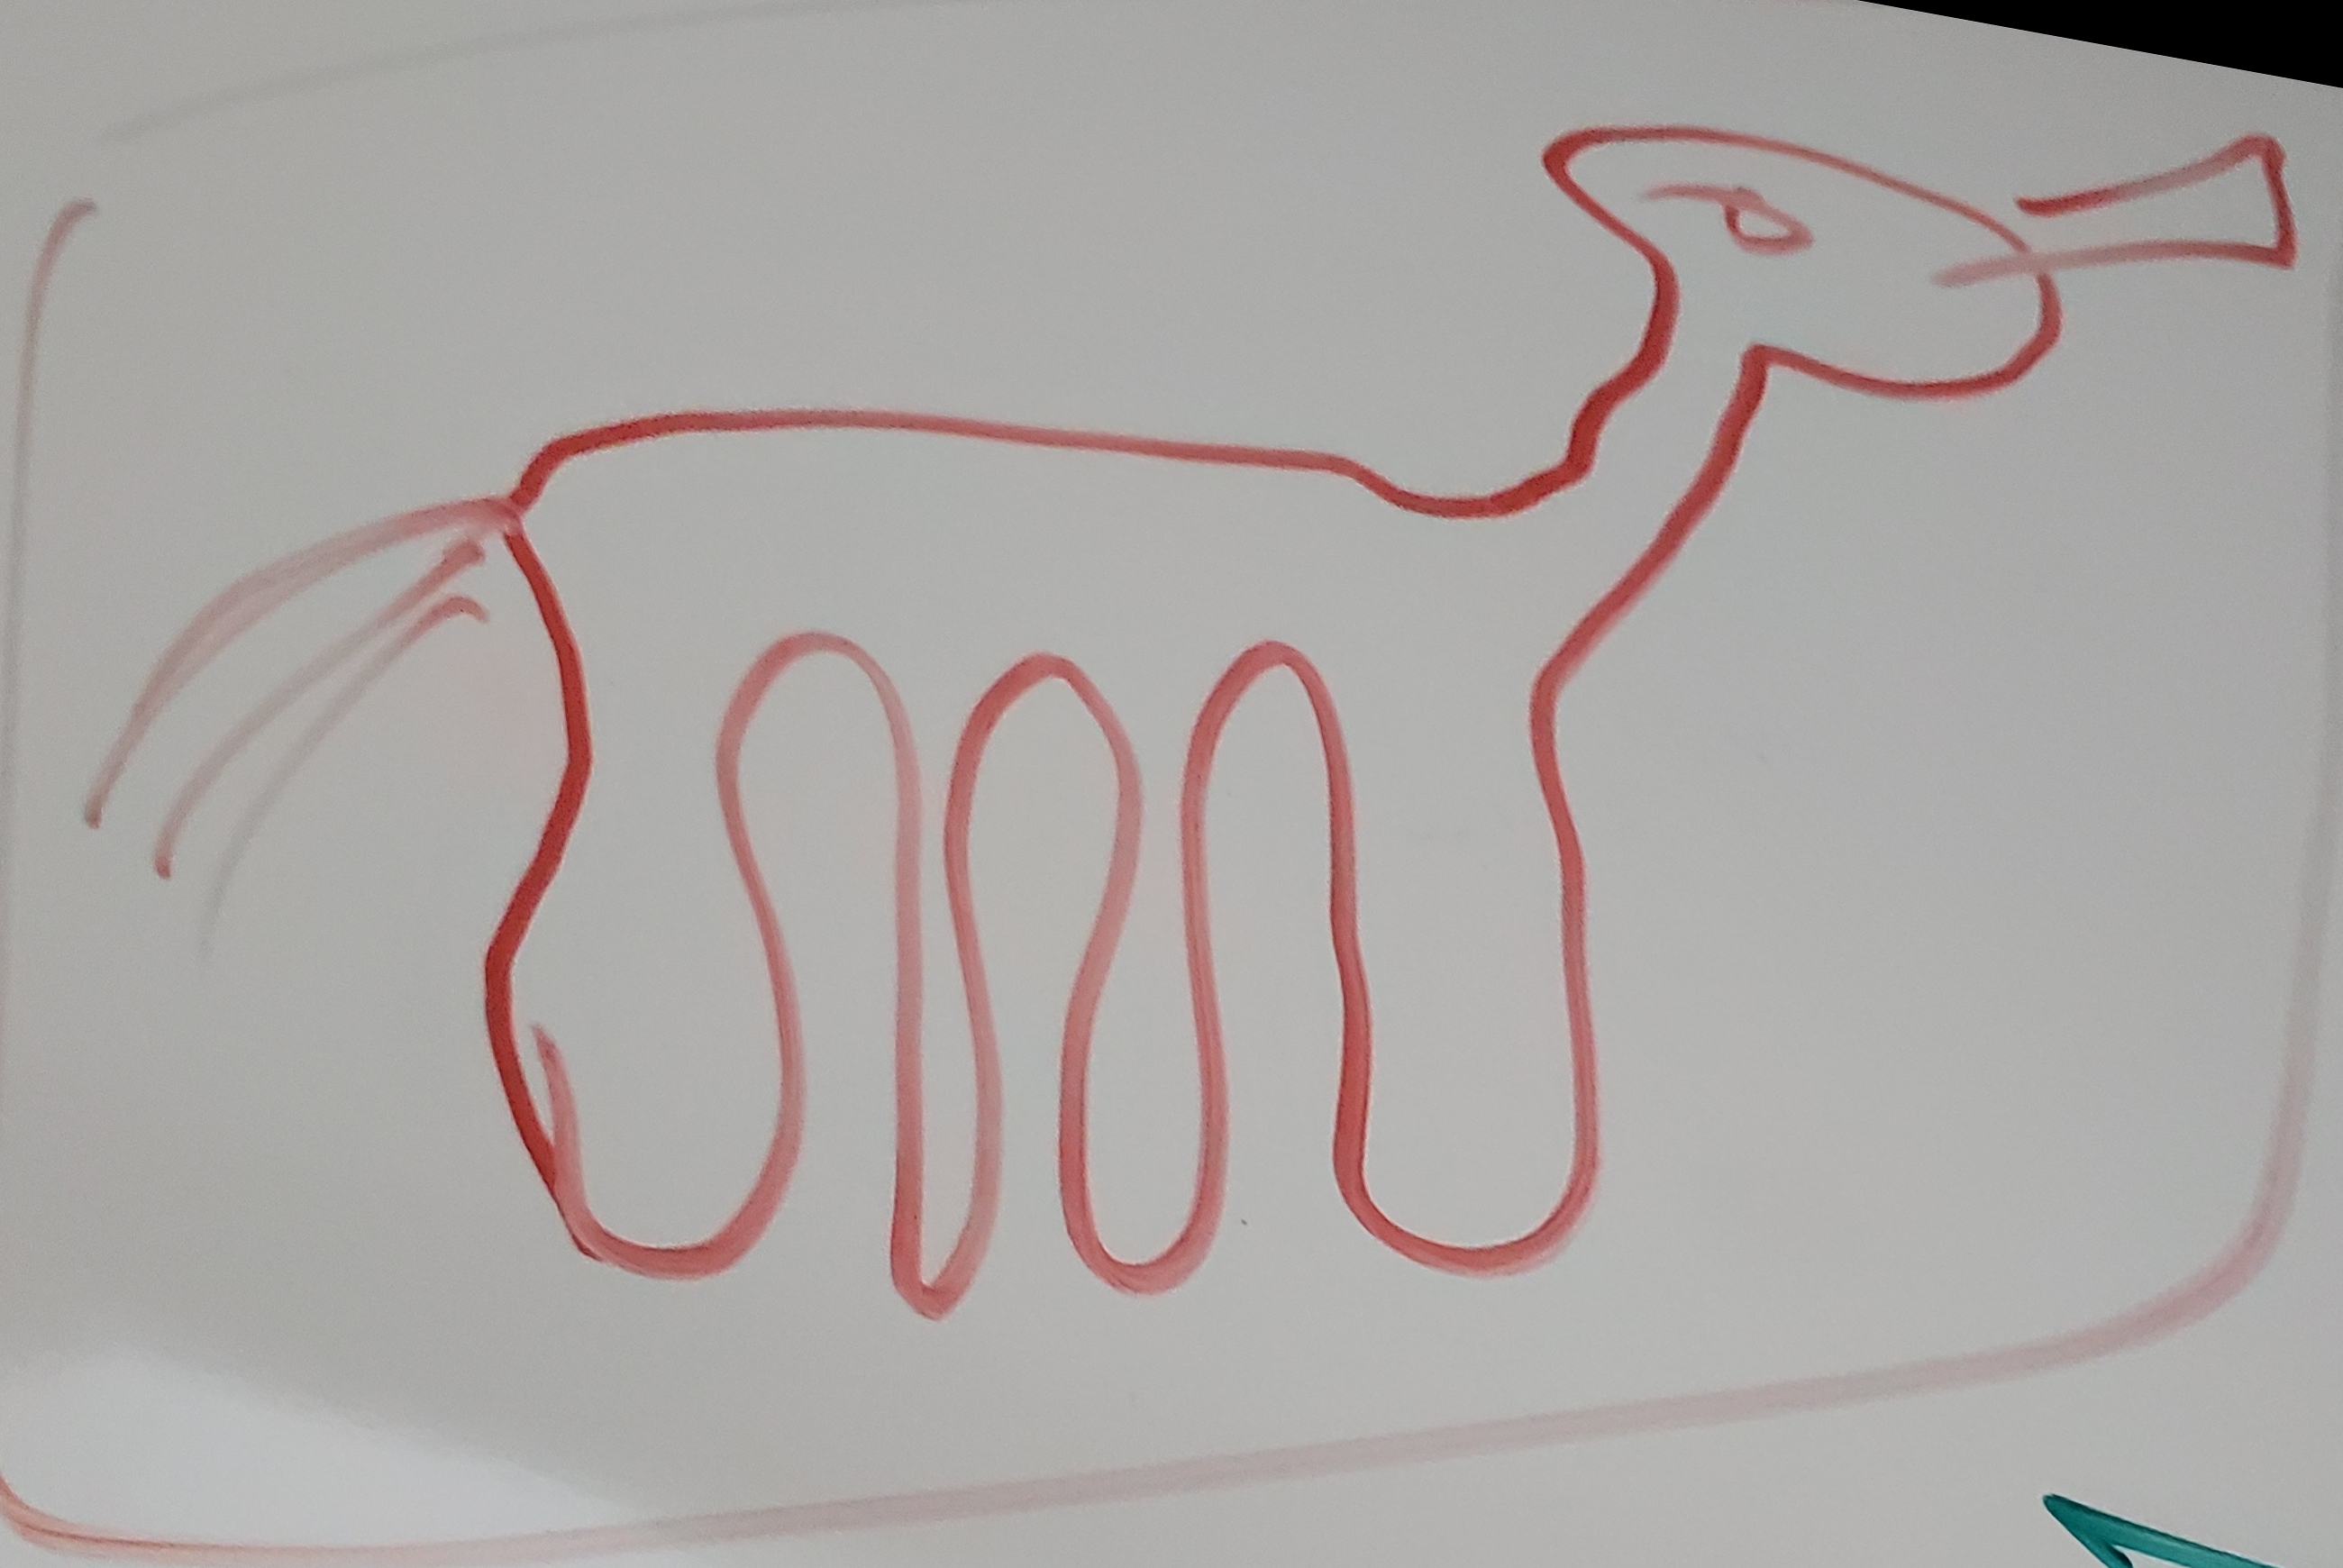 picture of a unicorn drawn onto a whiteboard